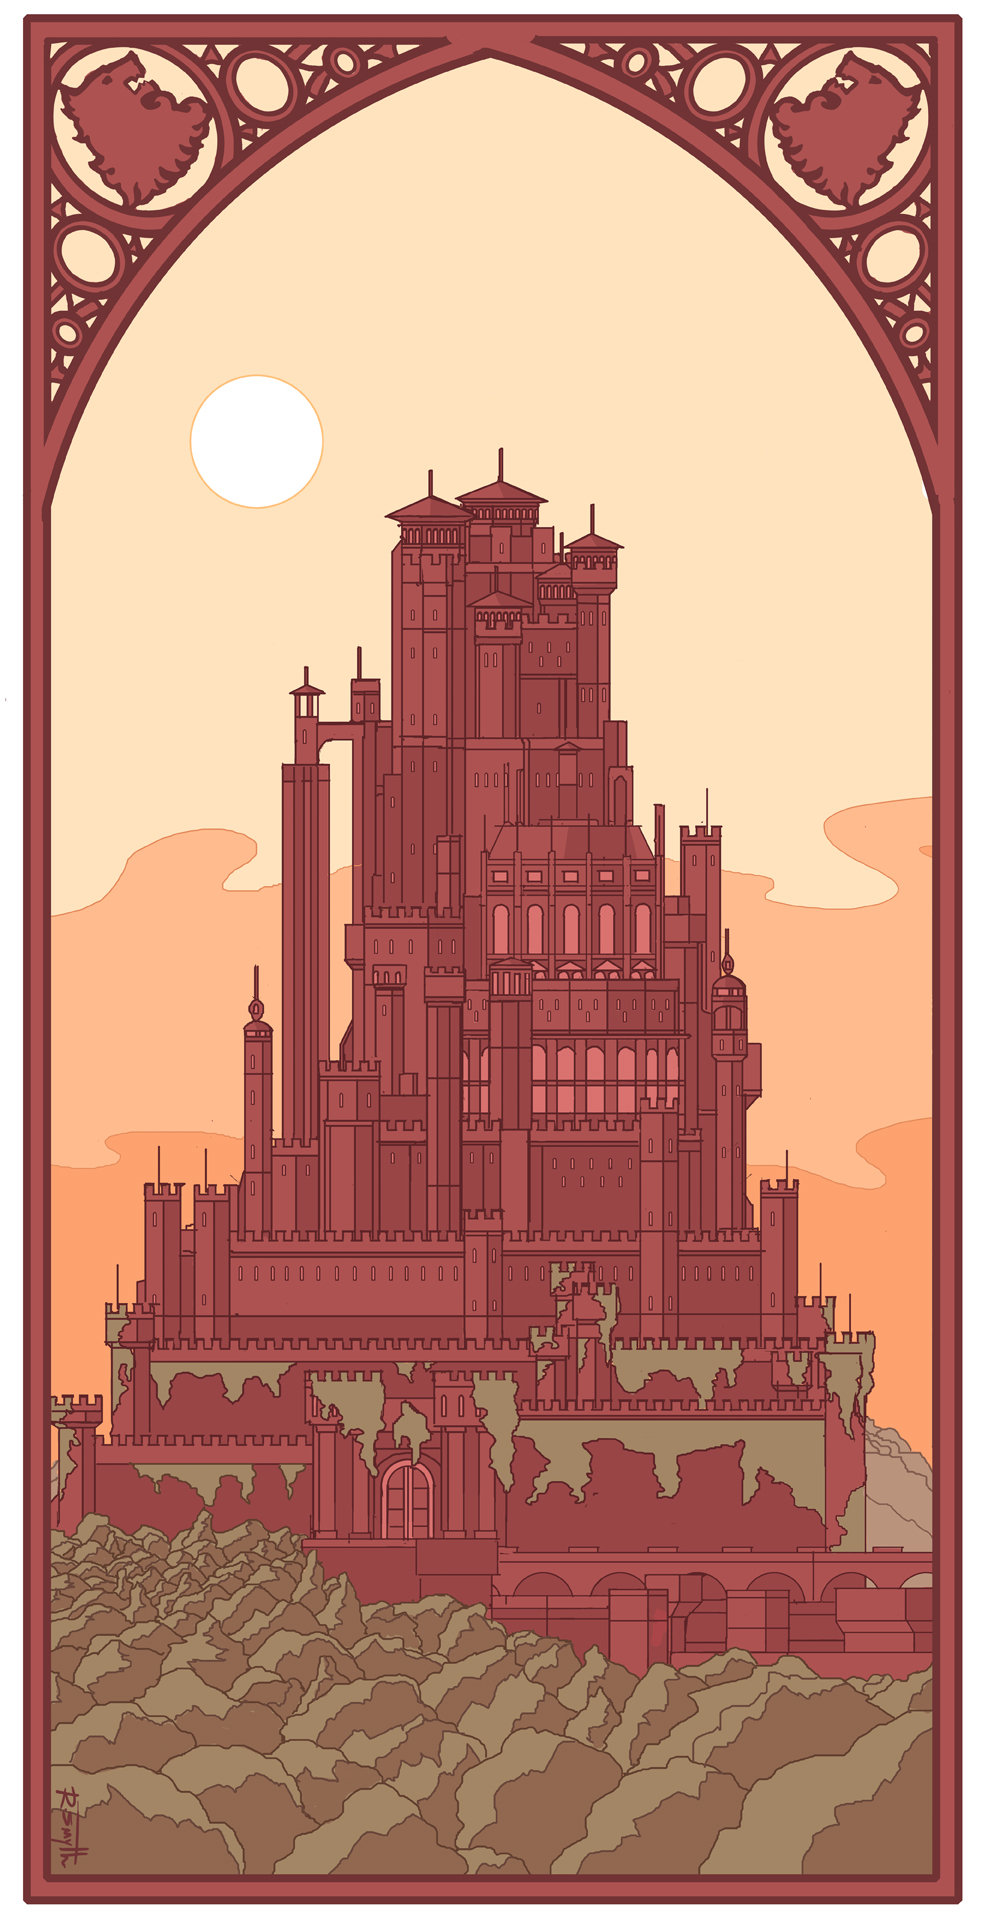 The Red Keep